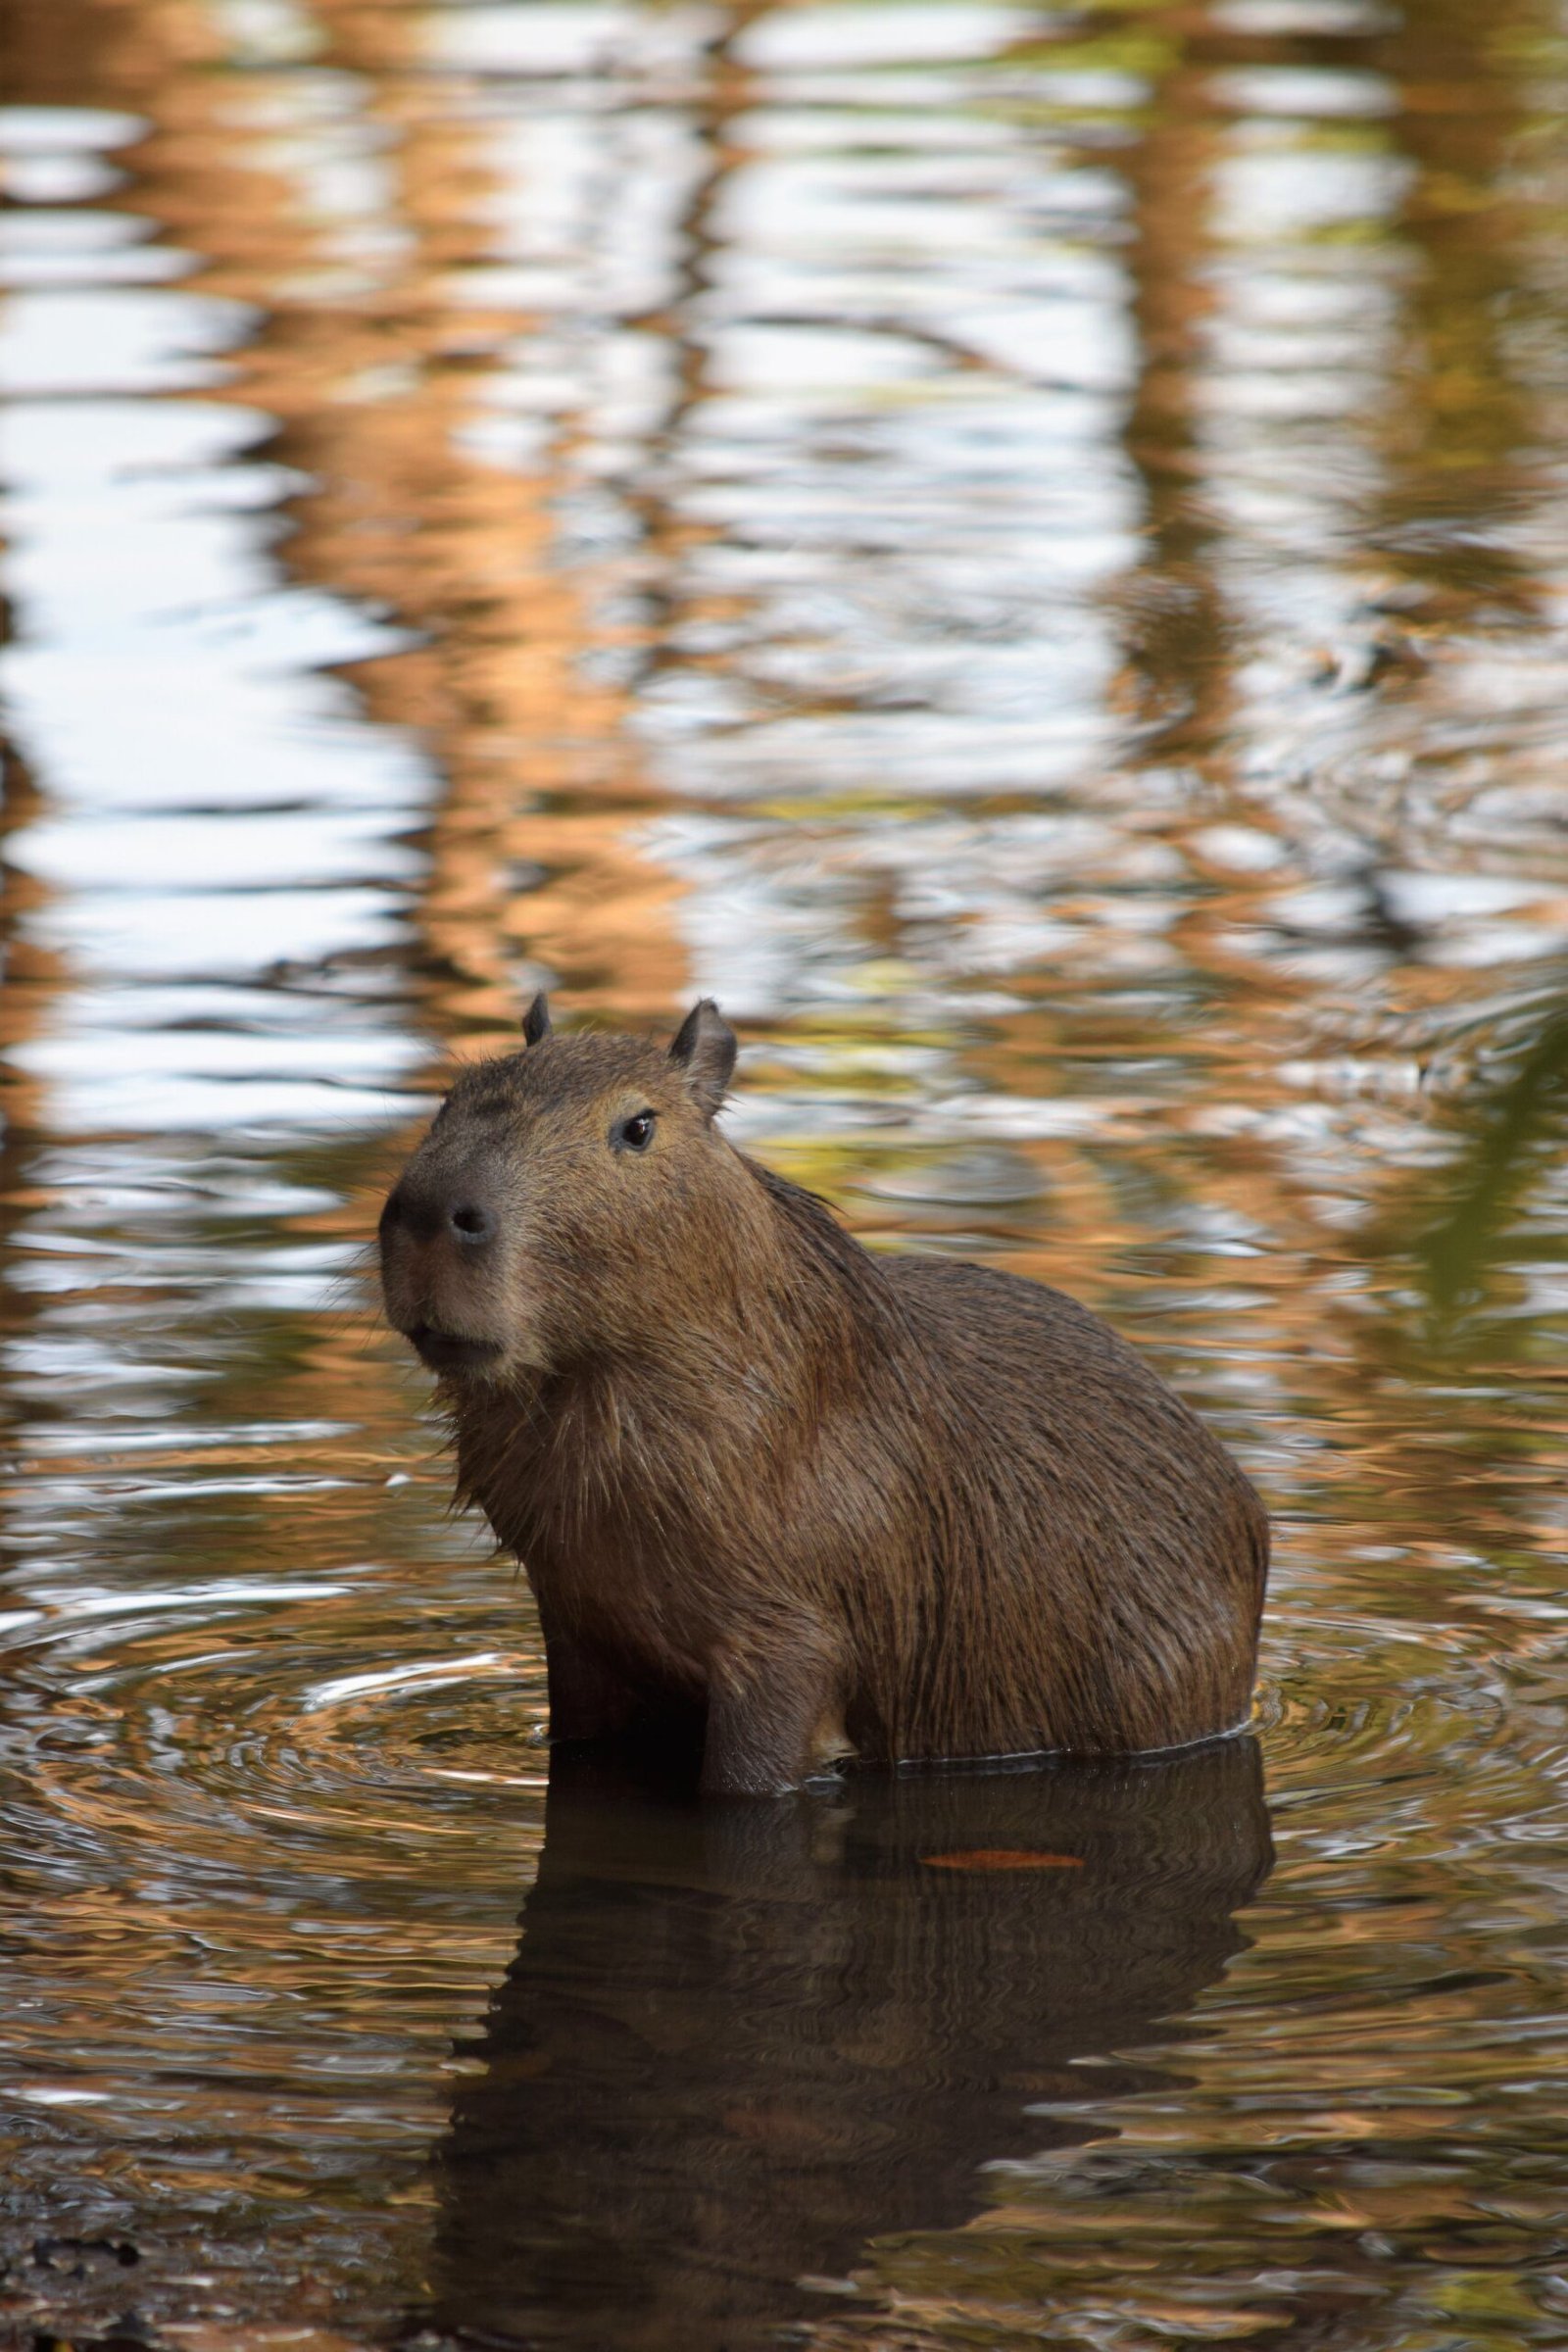 The Most Chill Animal: The Capybara